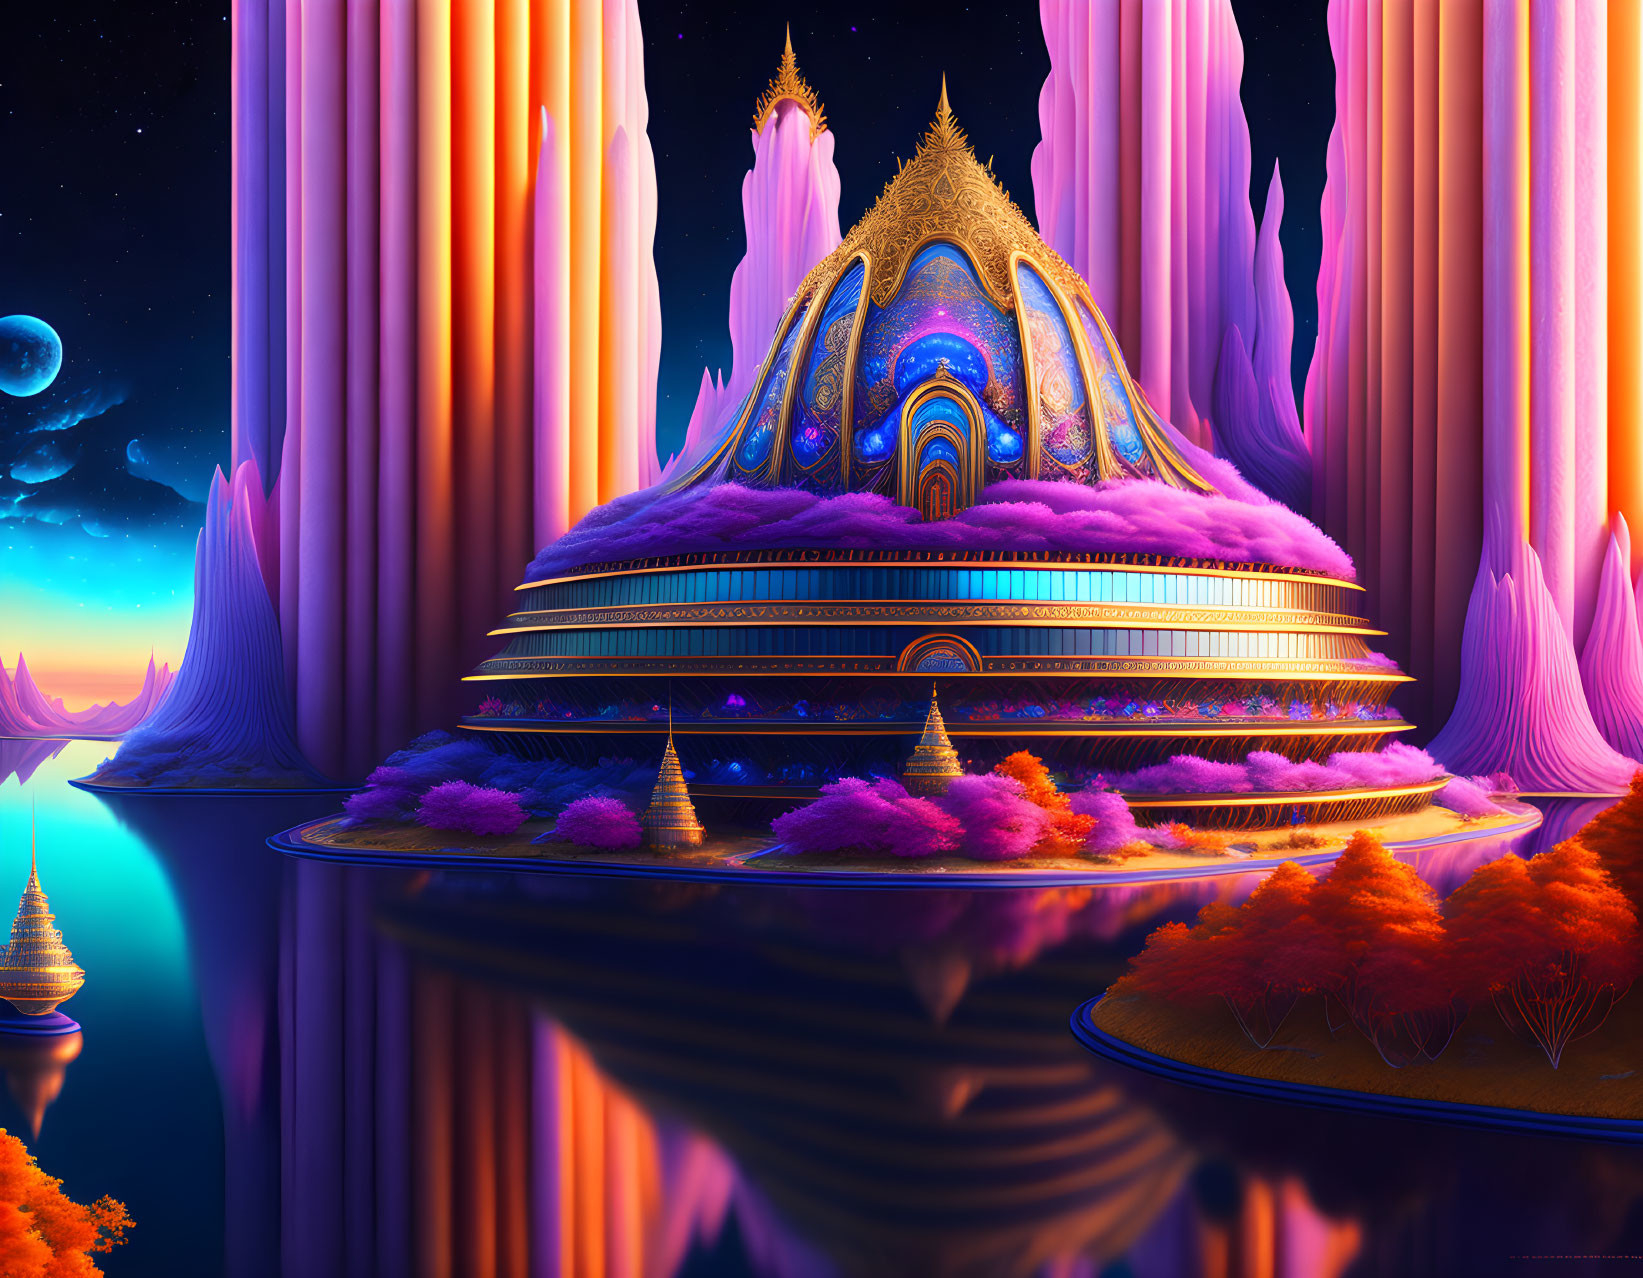 Colorful fantastical landscape with domed palace, neon flora, twilight sky.